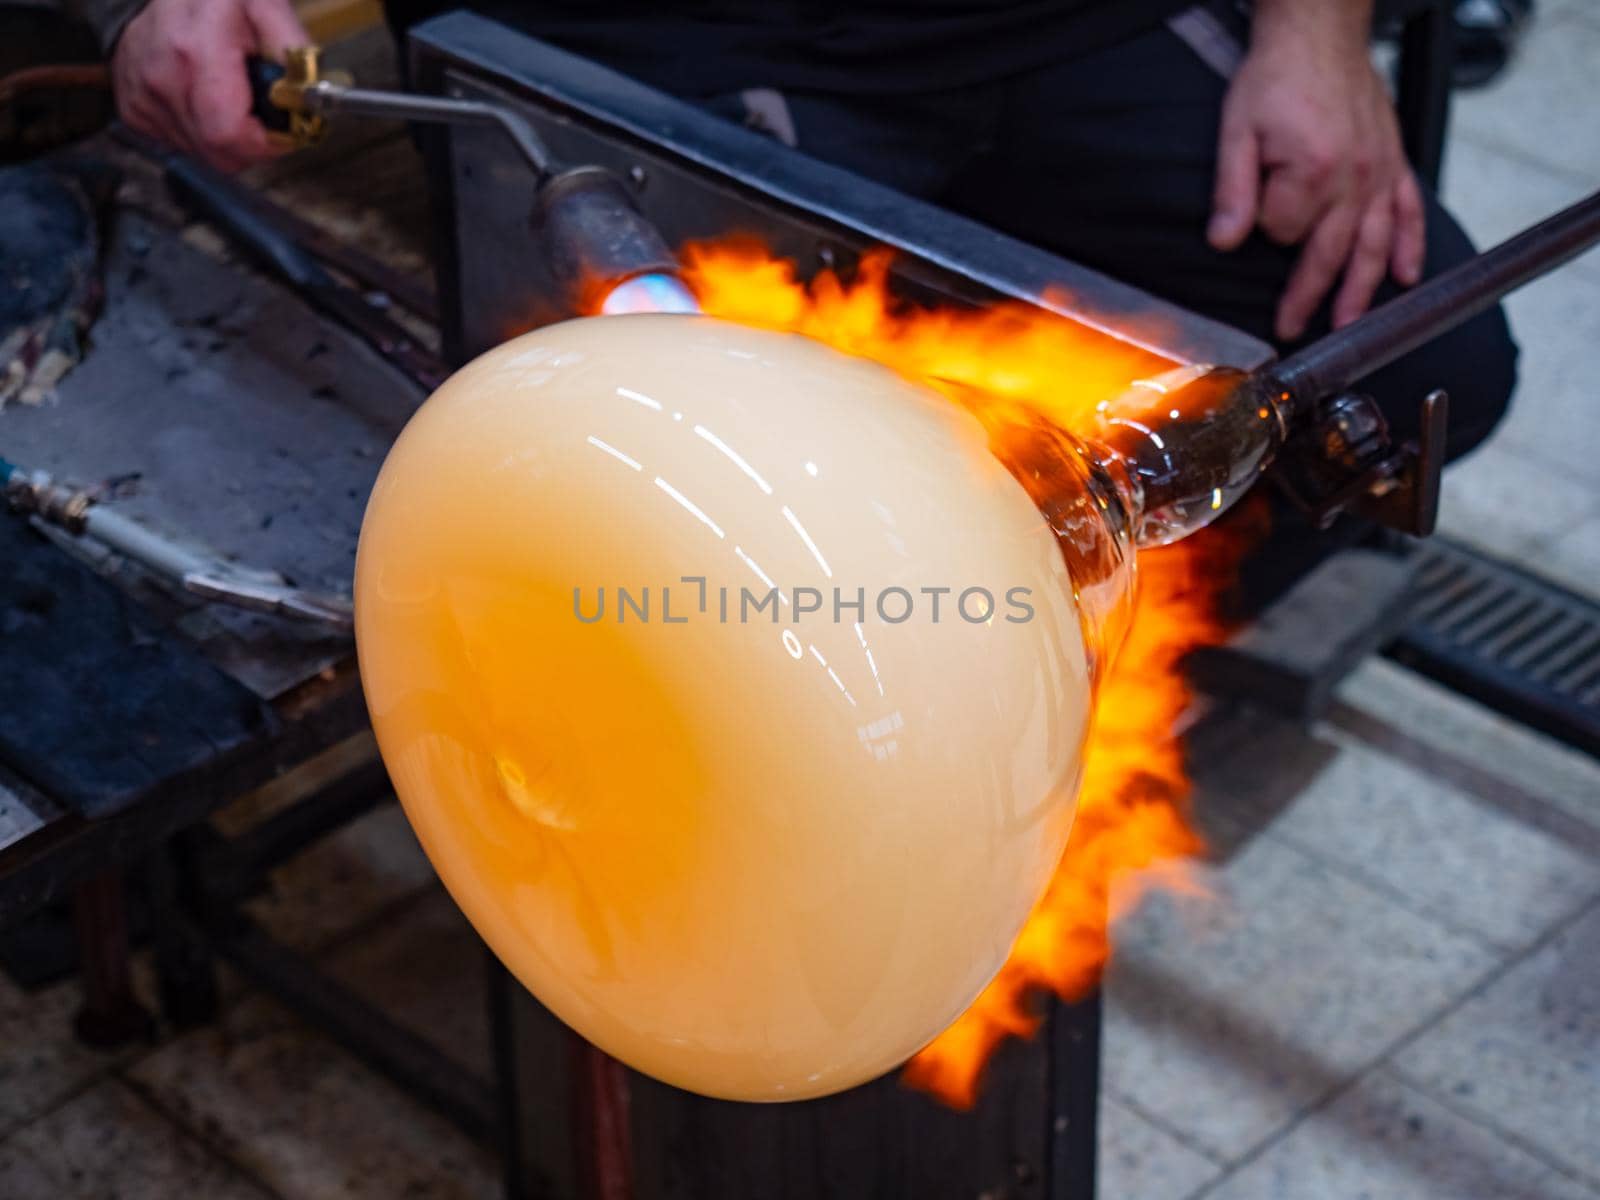 Glass artist forms the scorching glass with heats it with a gas burner by rdonar2